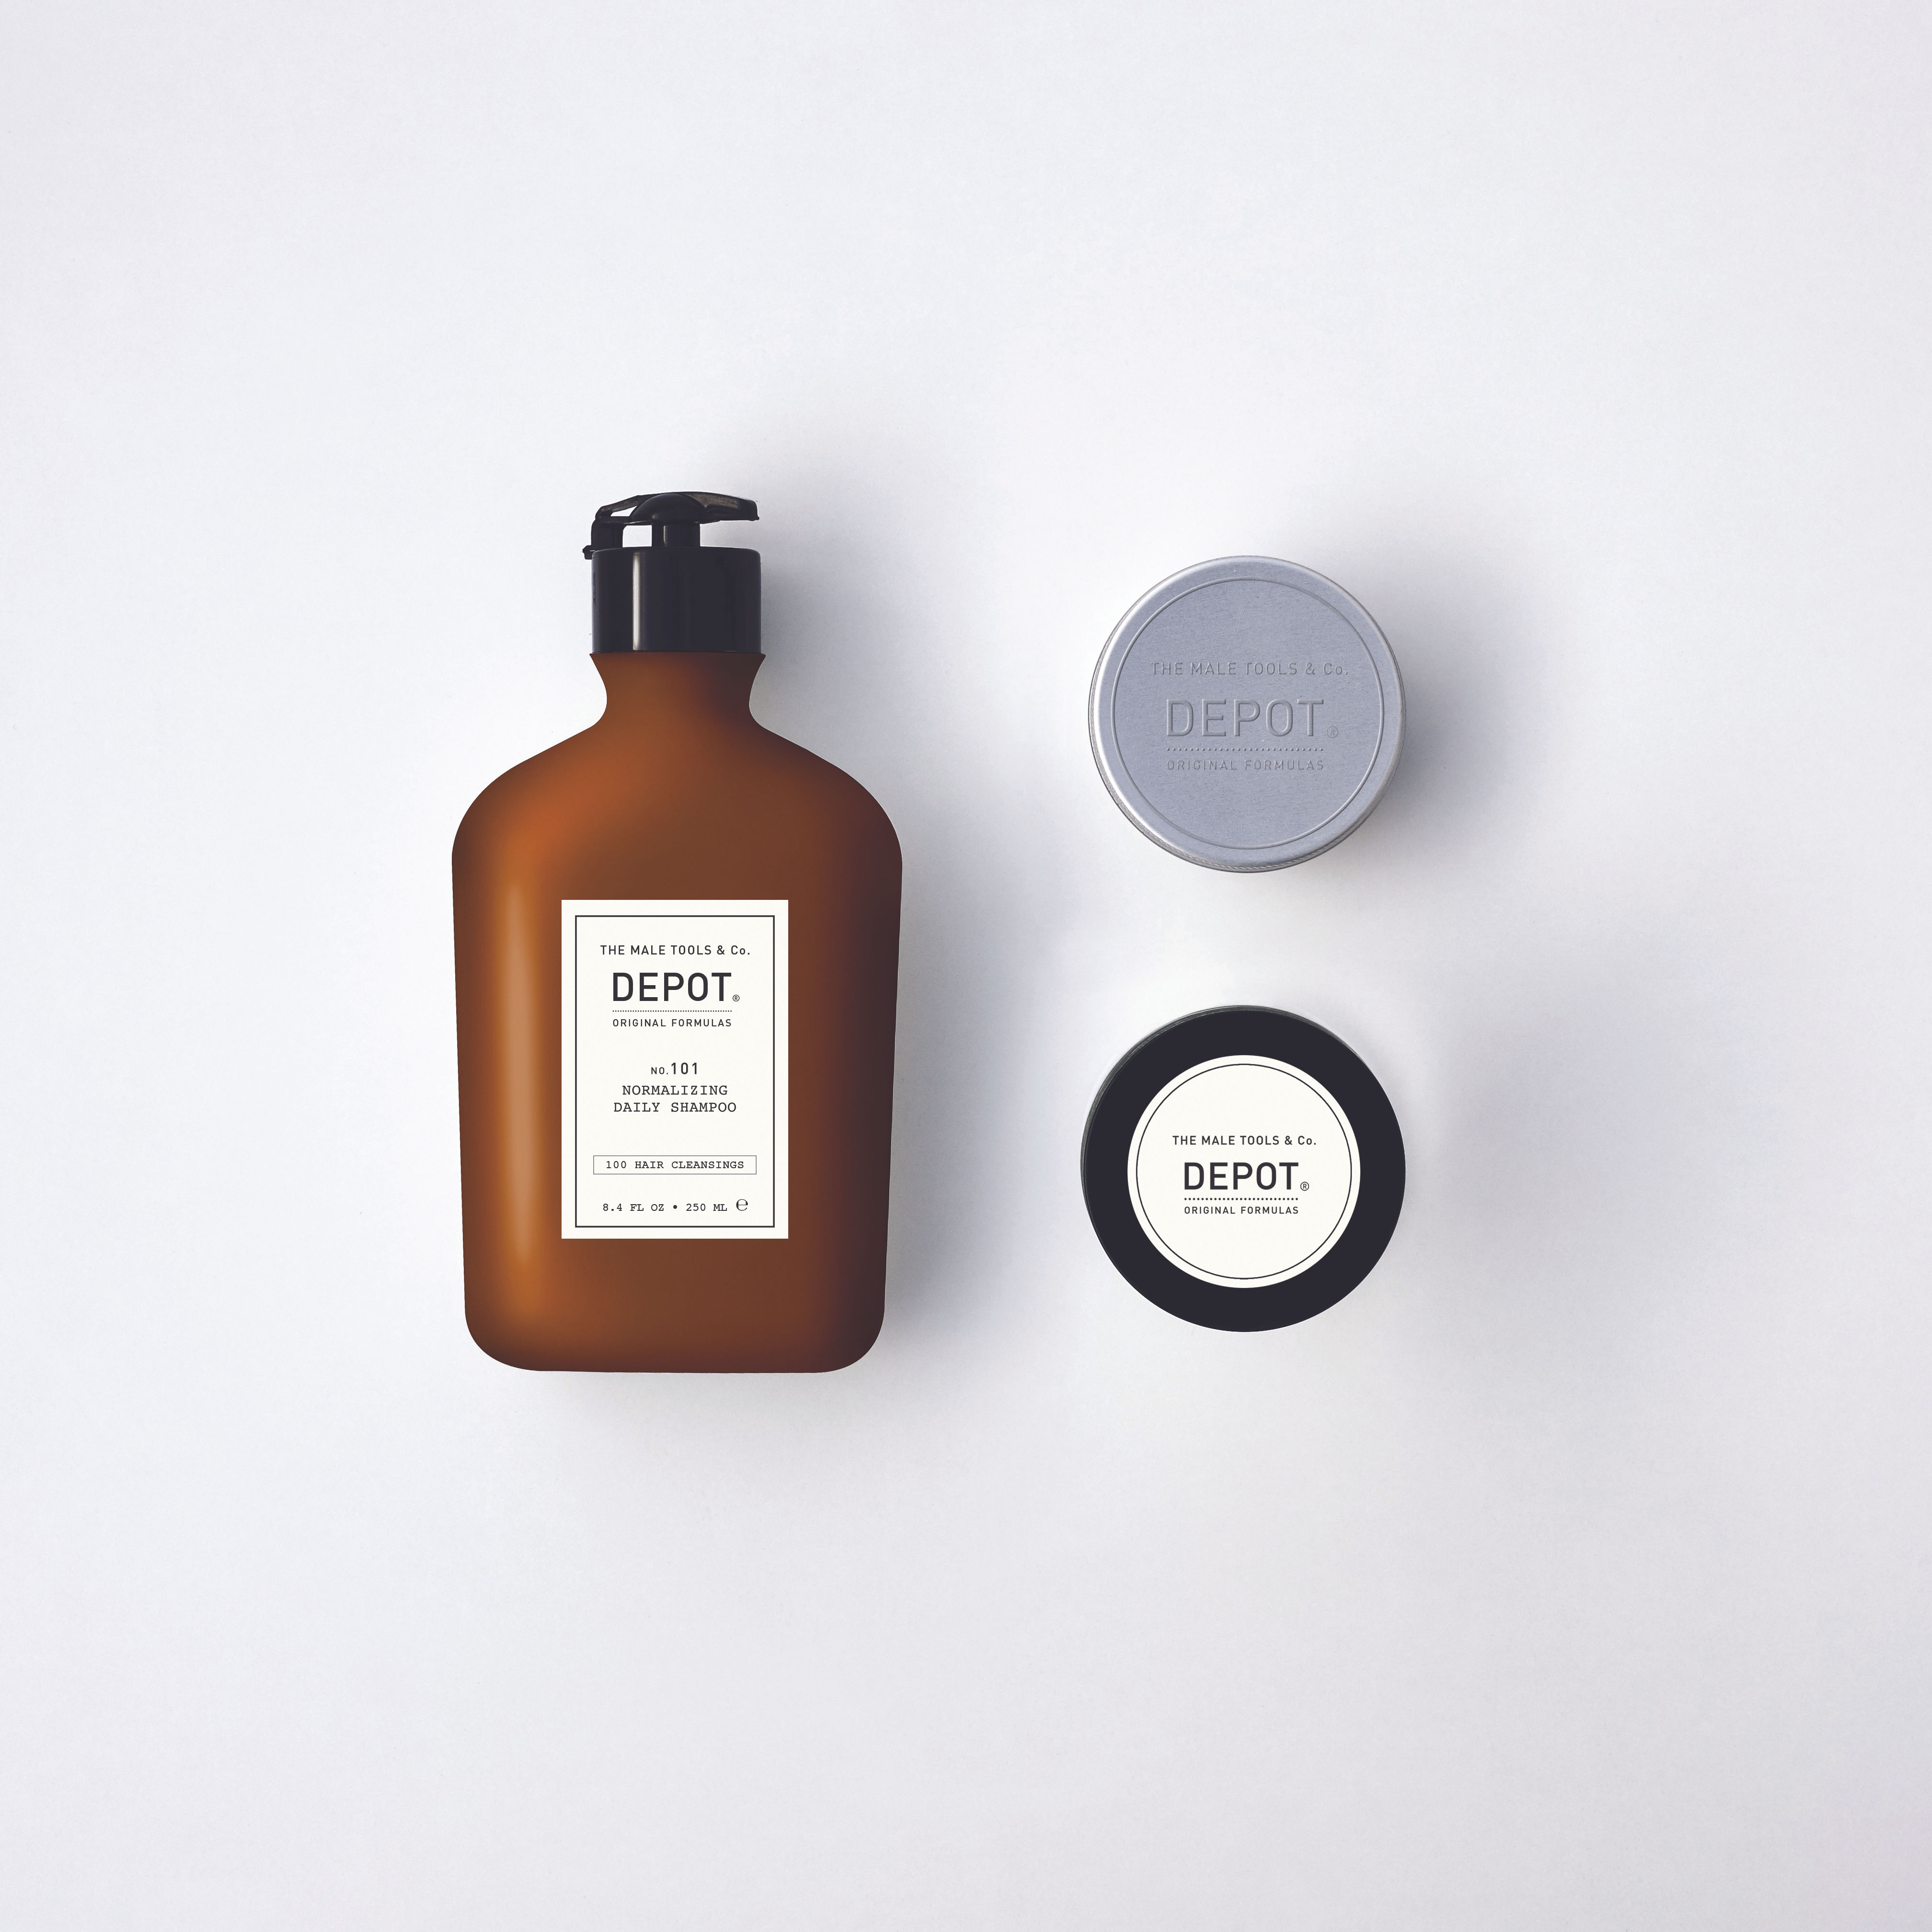 The Depot Male Tools & Co.: A minimalistic approach to men’s grooming